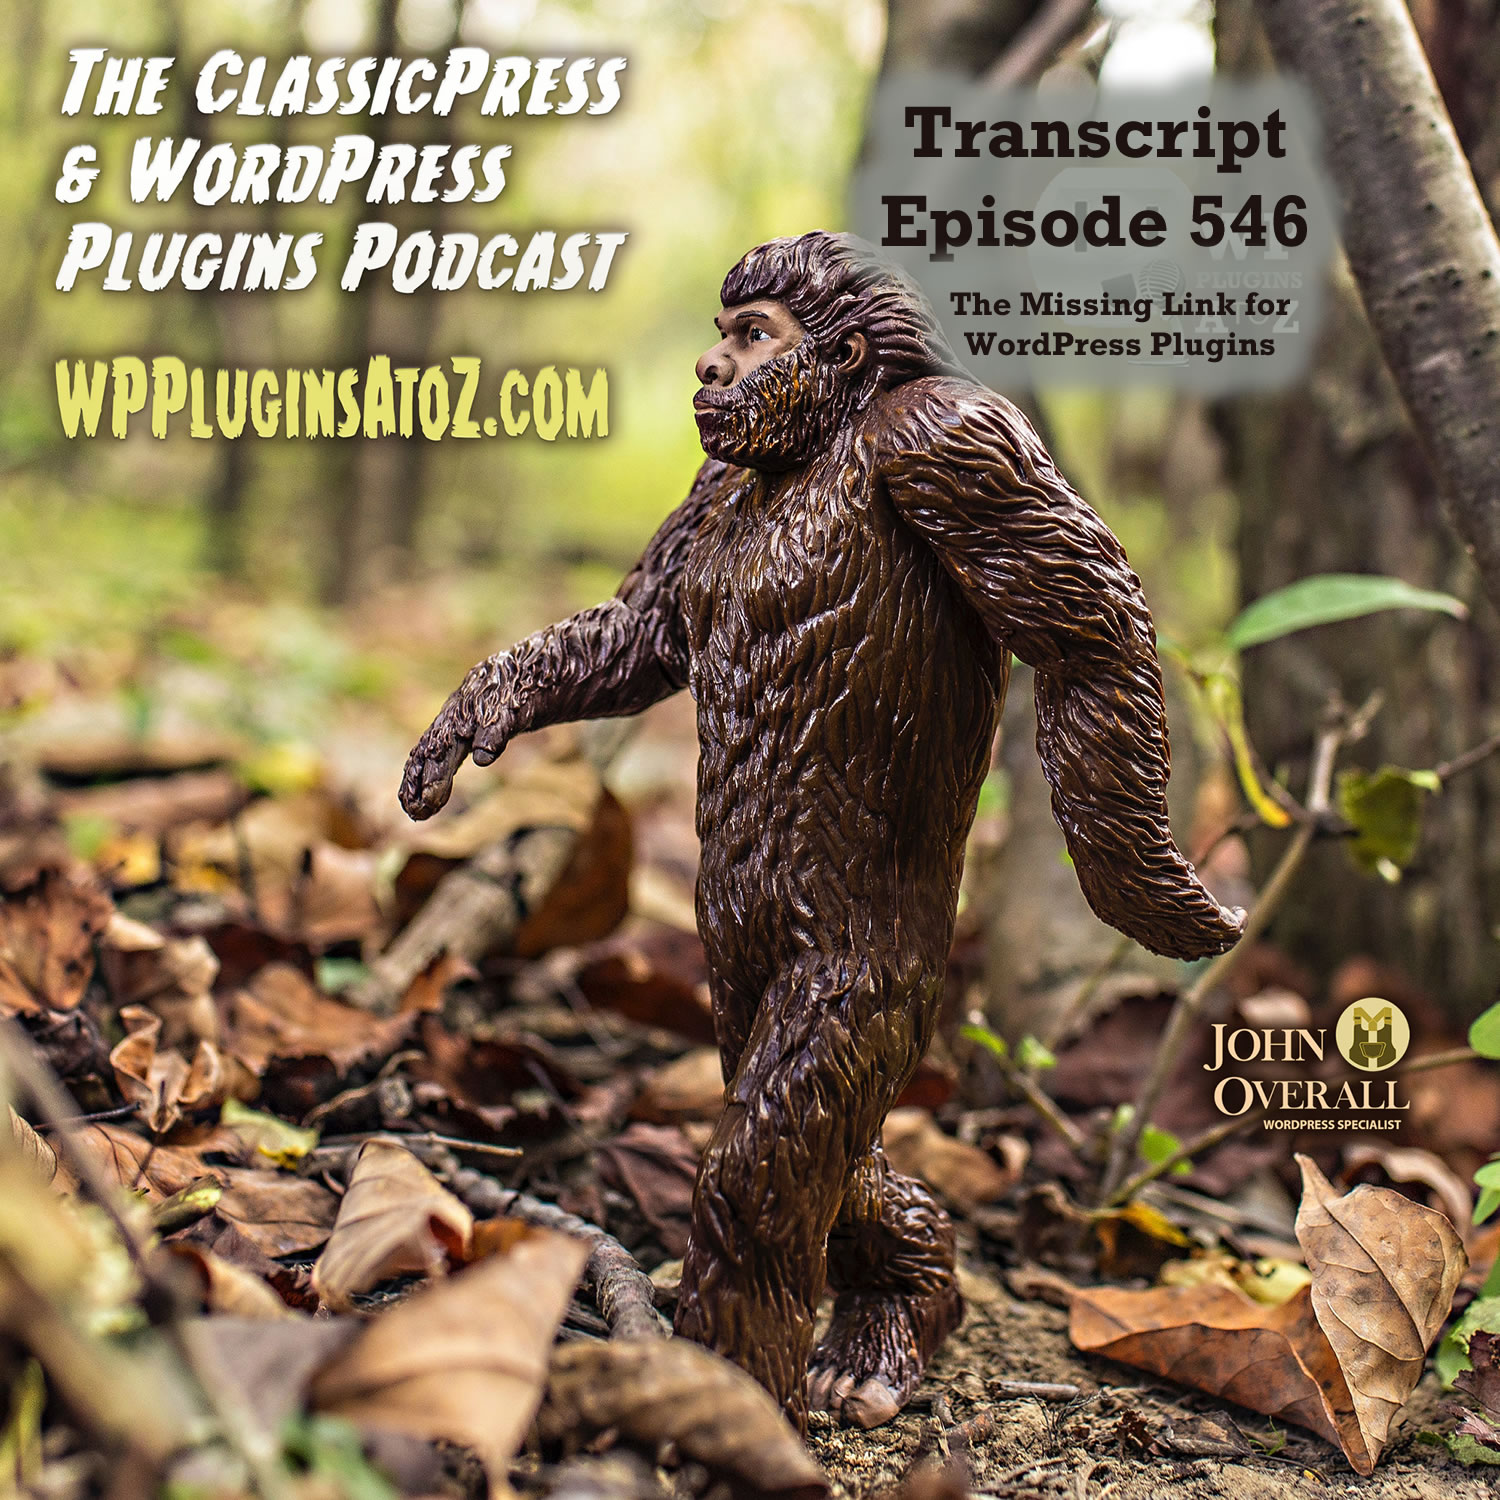 Transcript for Episode 546 and we have plugins for Removing Shortcodes, Custom Cursor, Easy Walls, Alternate Maps, Geo Maps, Library of Bugs, ... and ClassicPress Options. It's all coming up on WordPress Plugins A-Z!